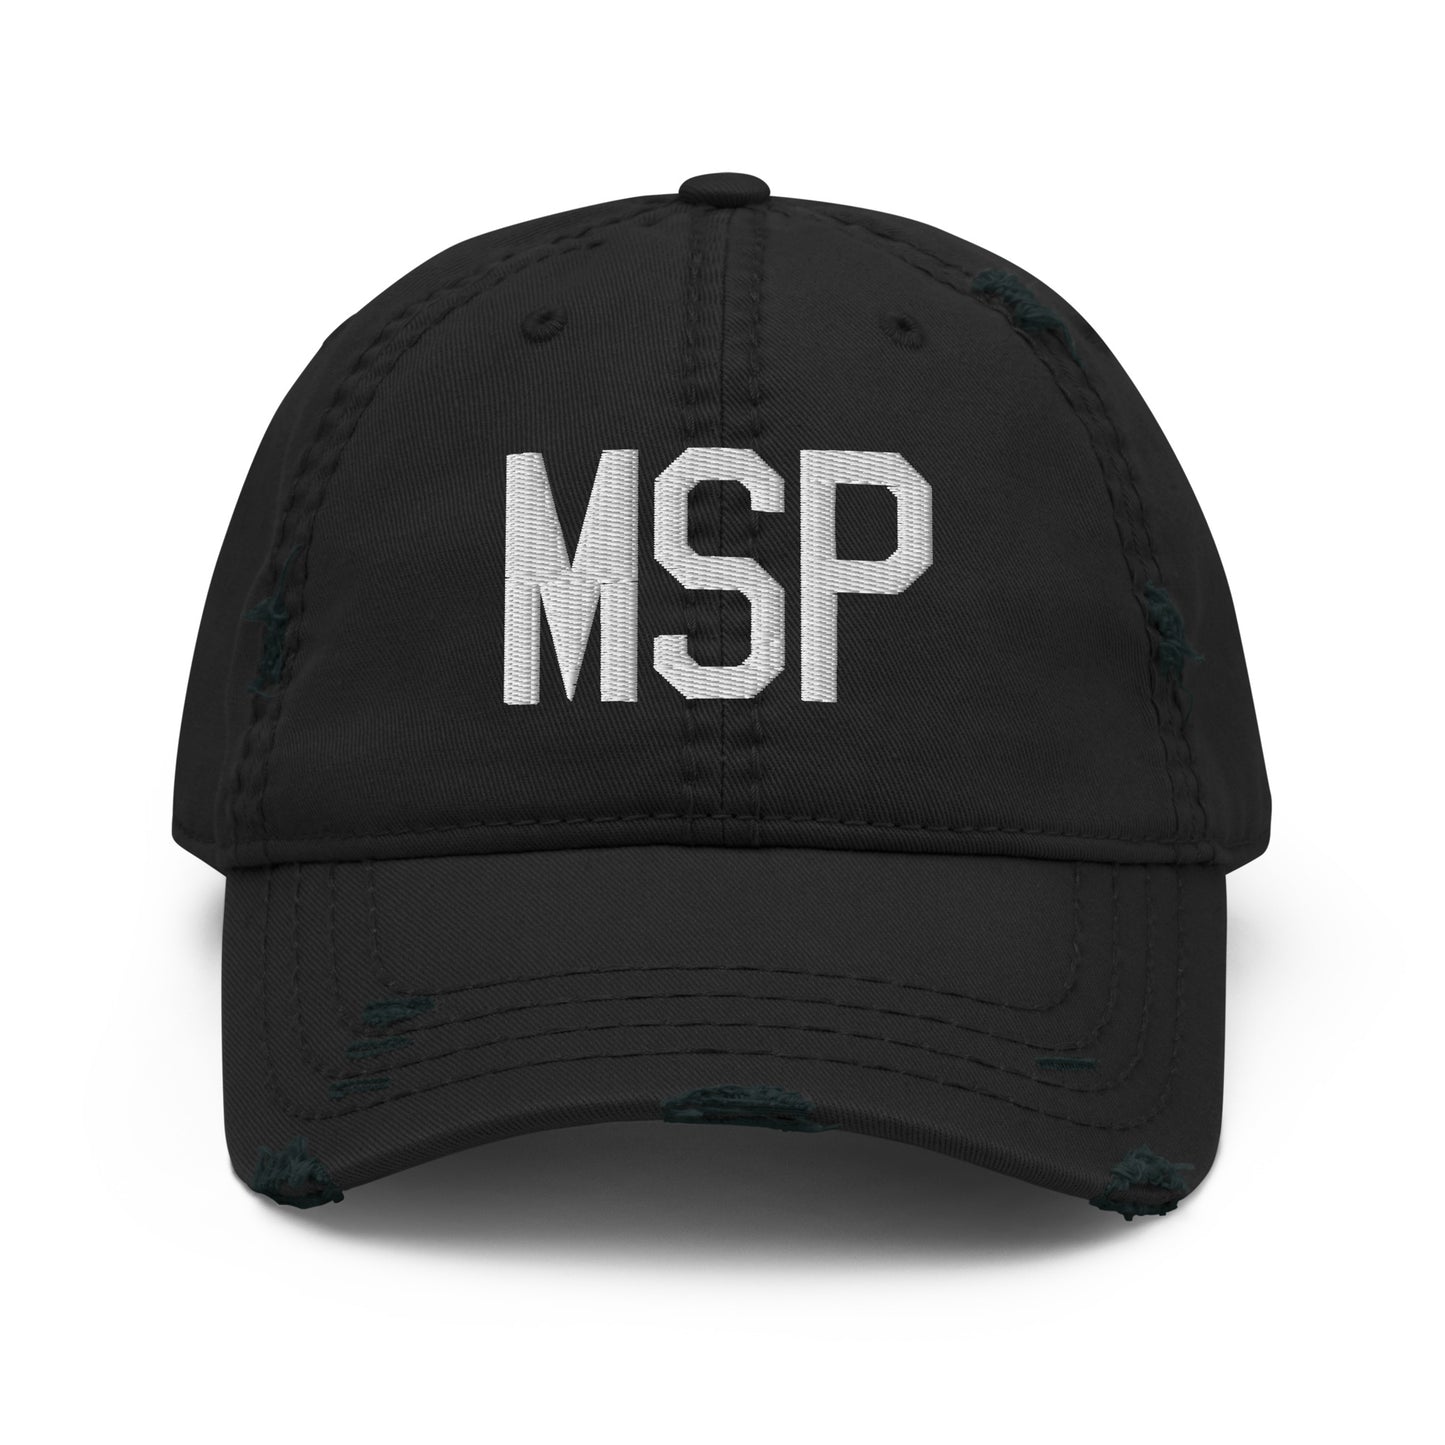 Airport Code Distressed Hat - White • MSP Minneapolis • YHM Designs - Image 10